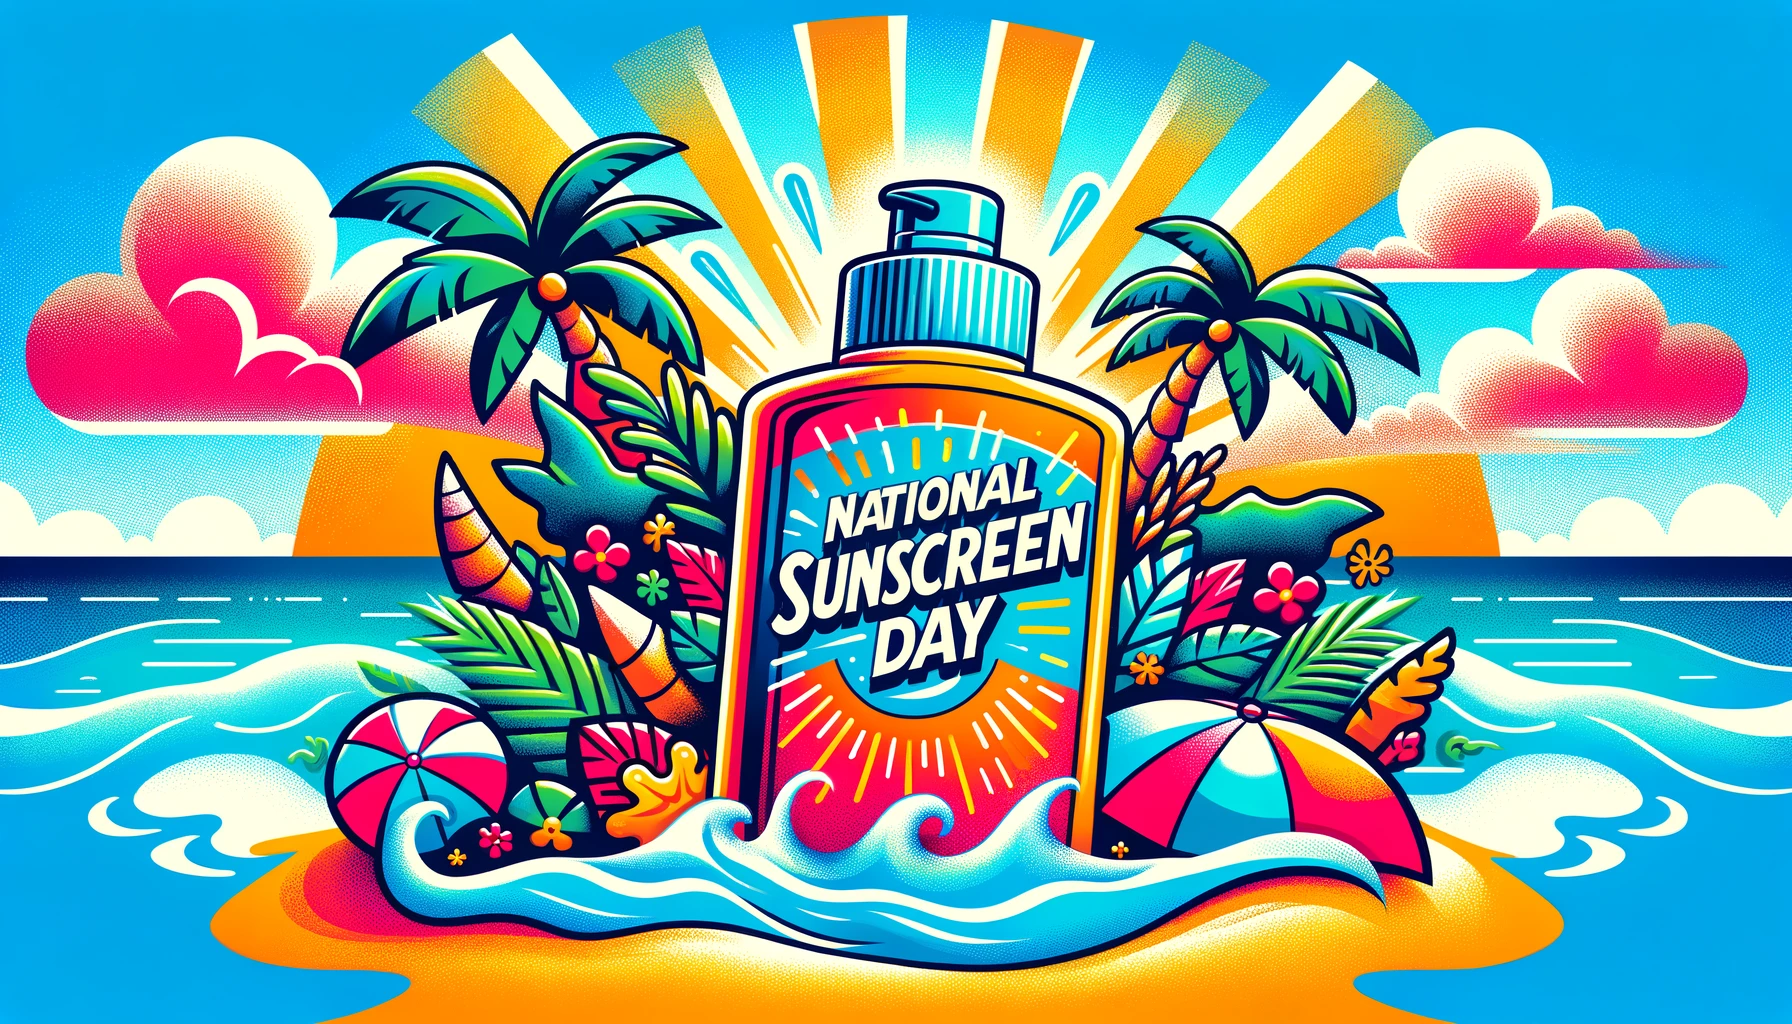 Warm Sunscreen Day Messages for Family and Friends